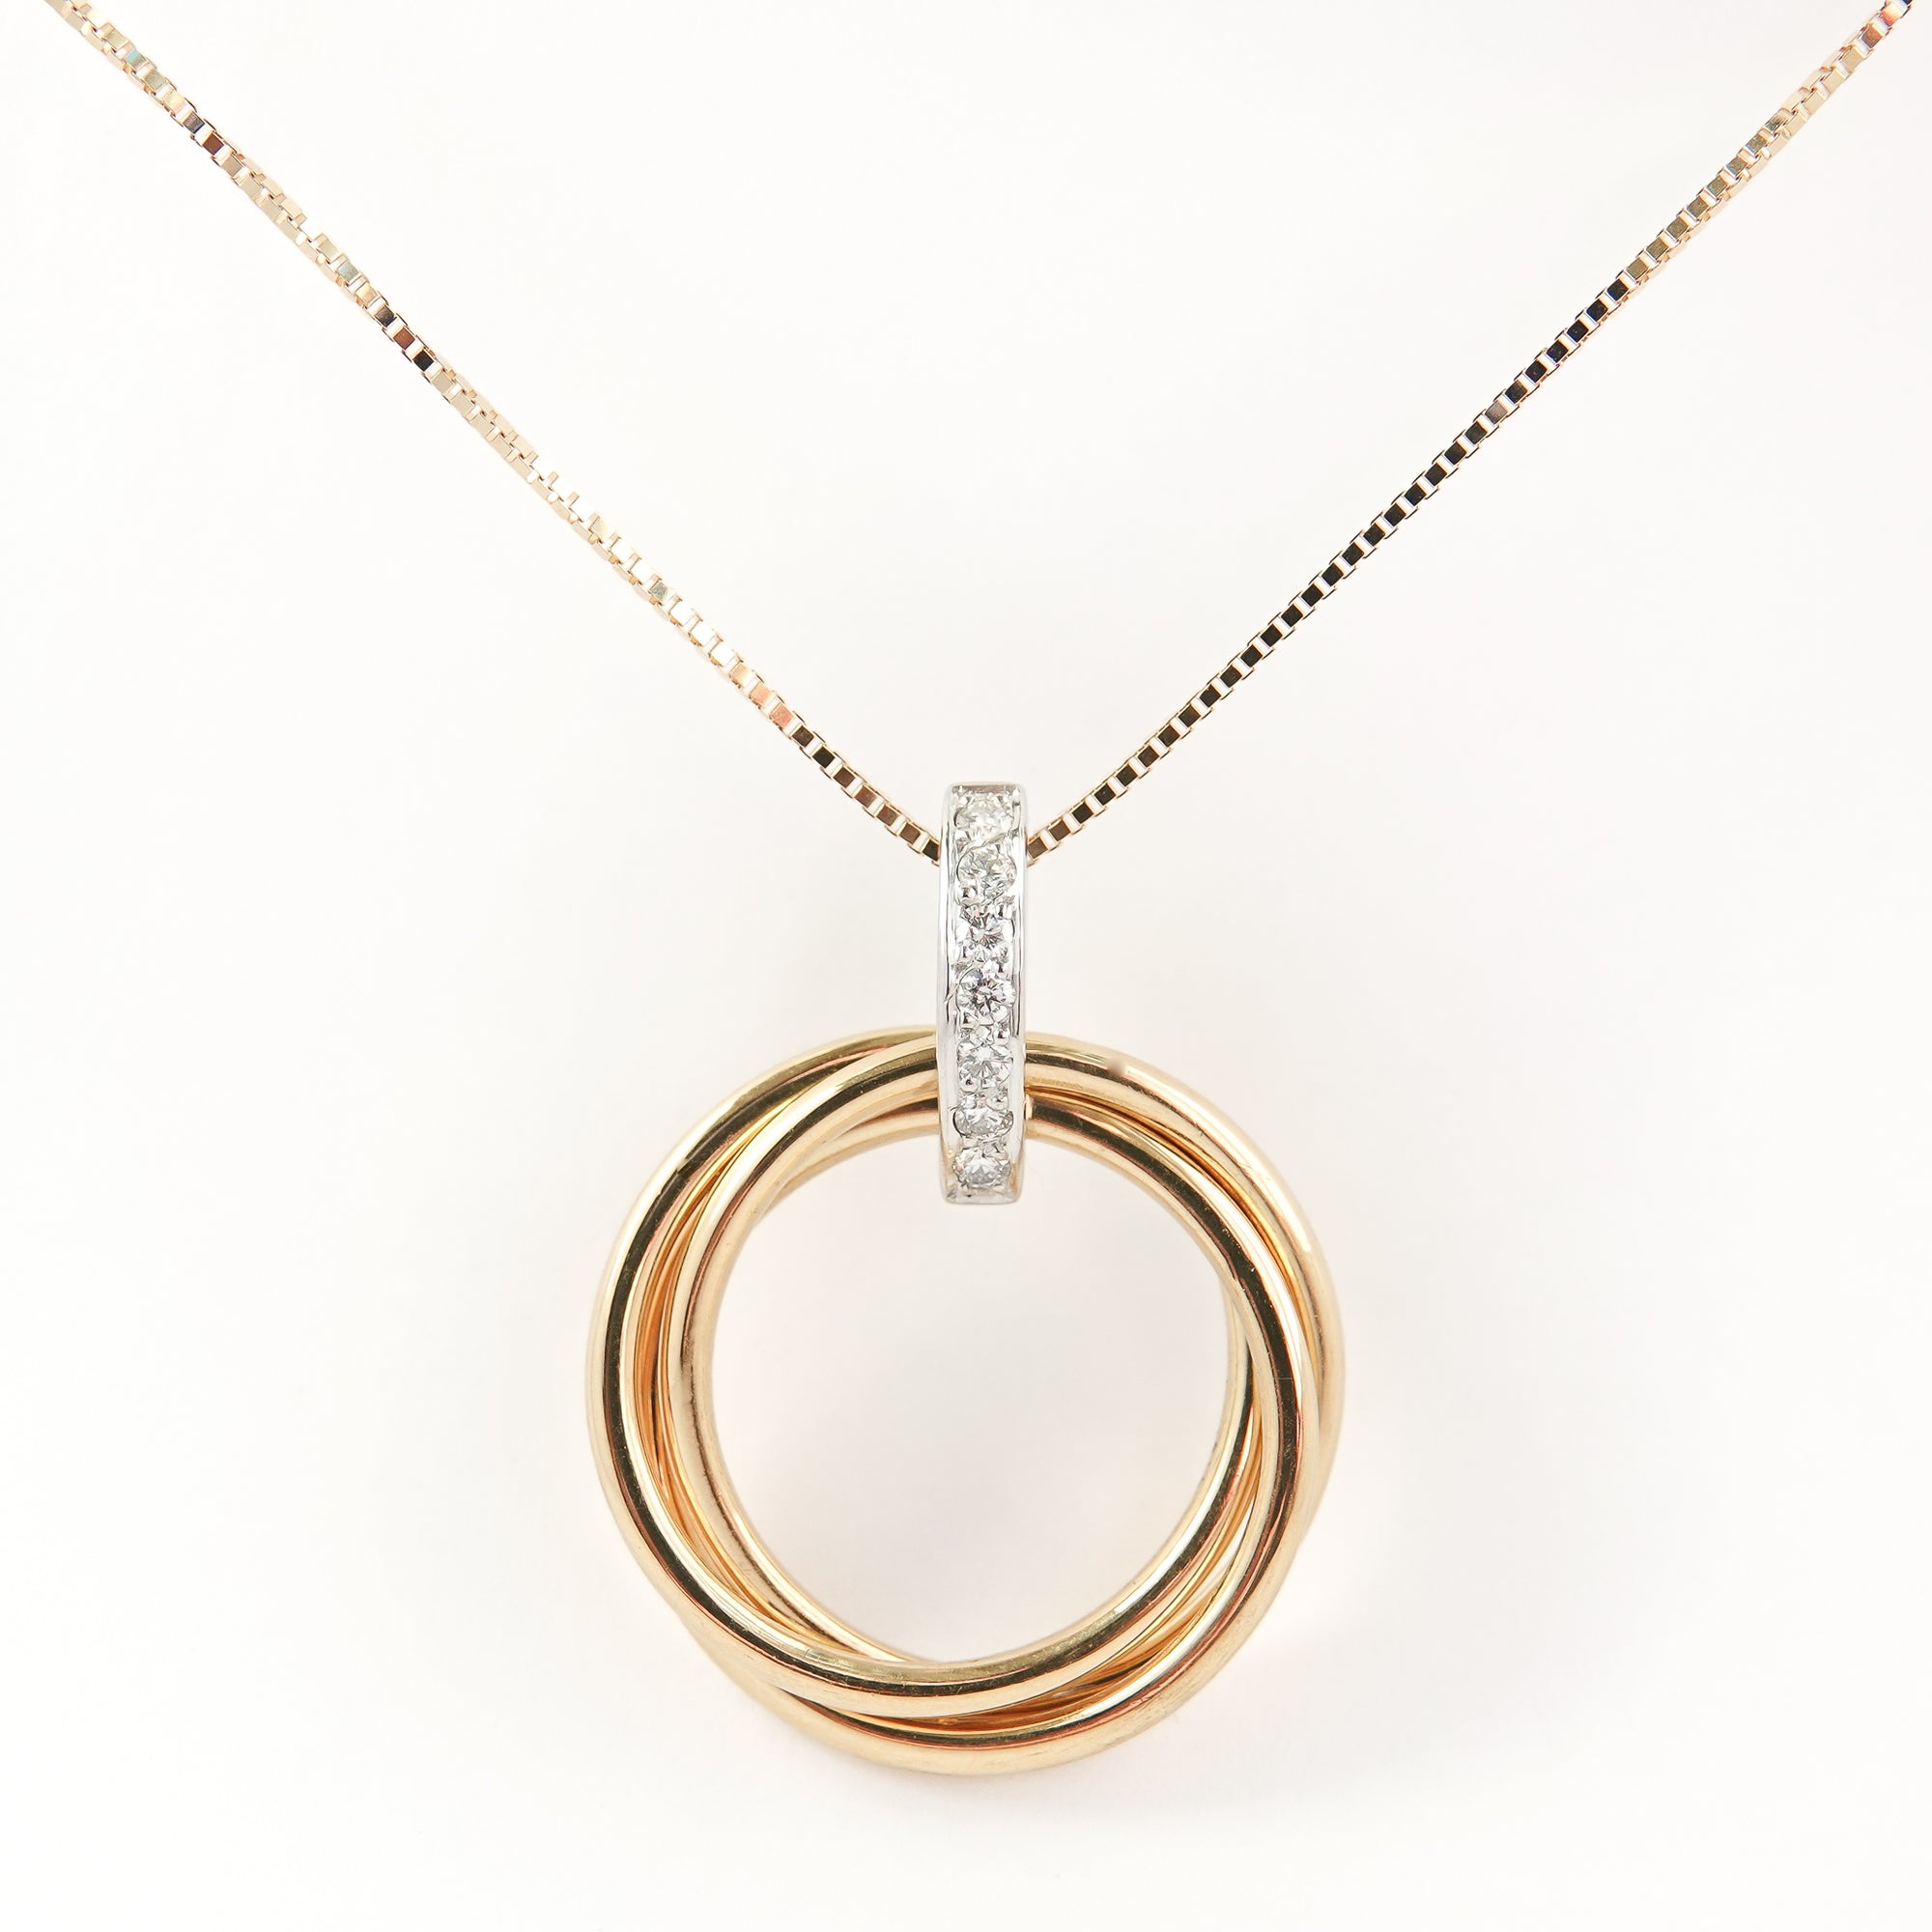 Contemporary Russian style 18ct gold and platinum necklace with diamonds